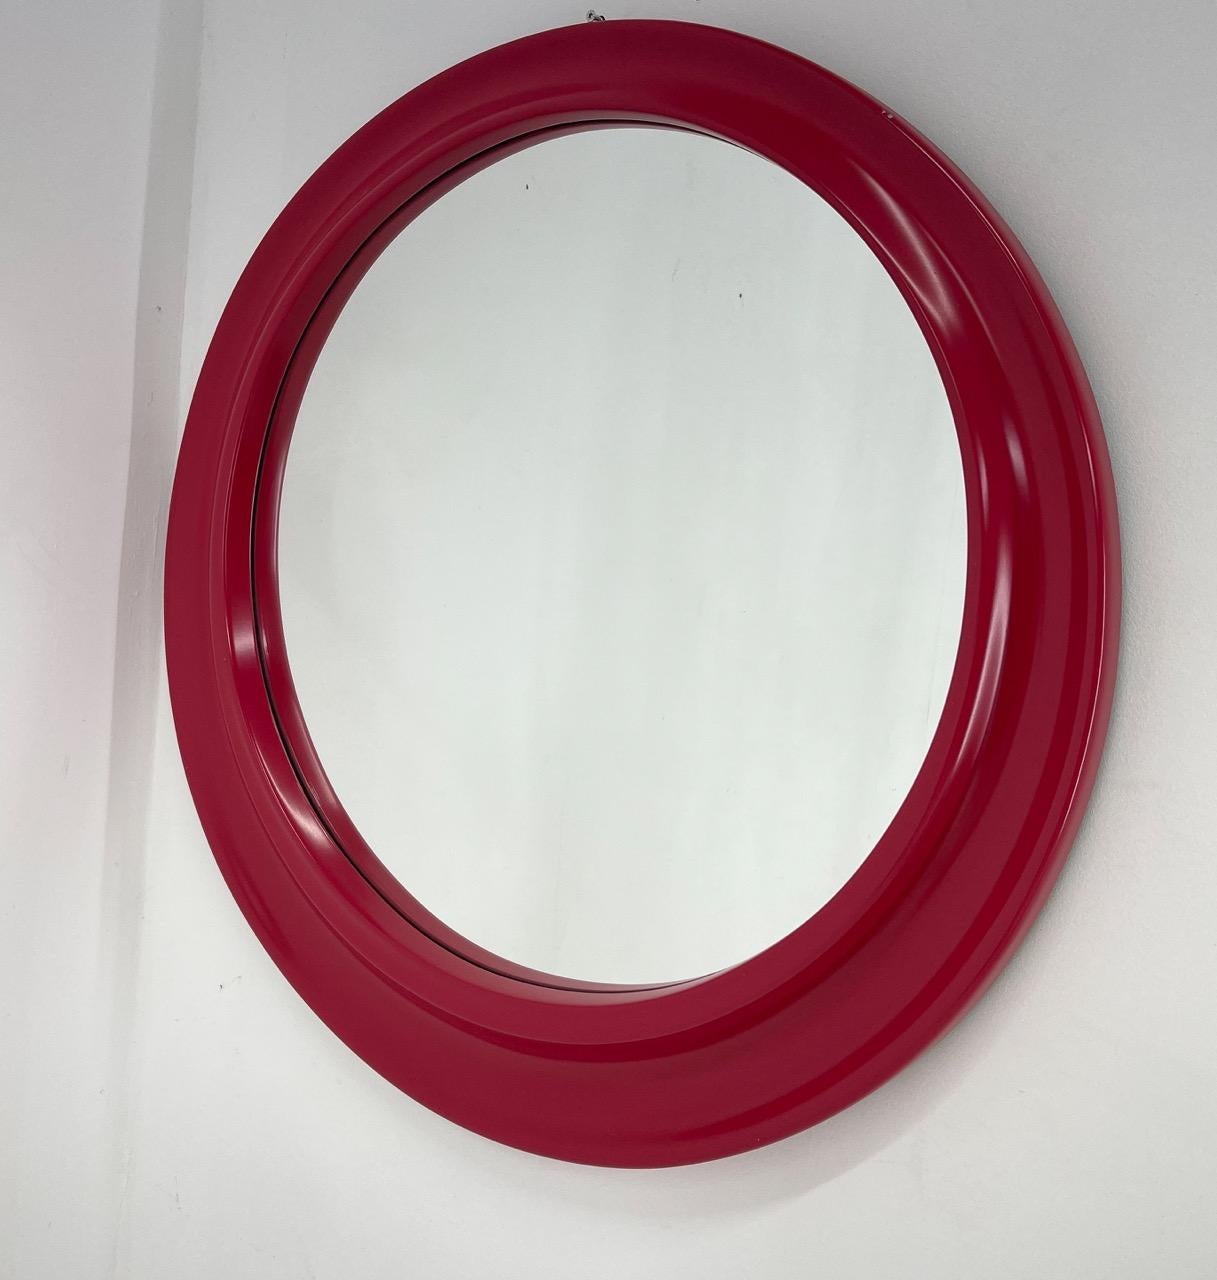 Vintage Italian wall mirror. Very good vintage condition, all imperfections are visible in the photos.